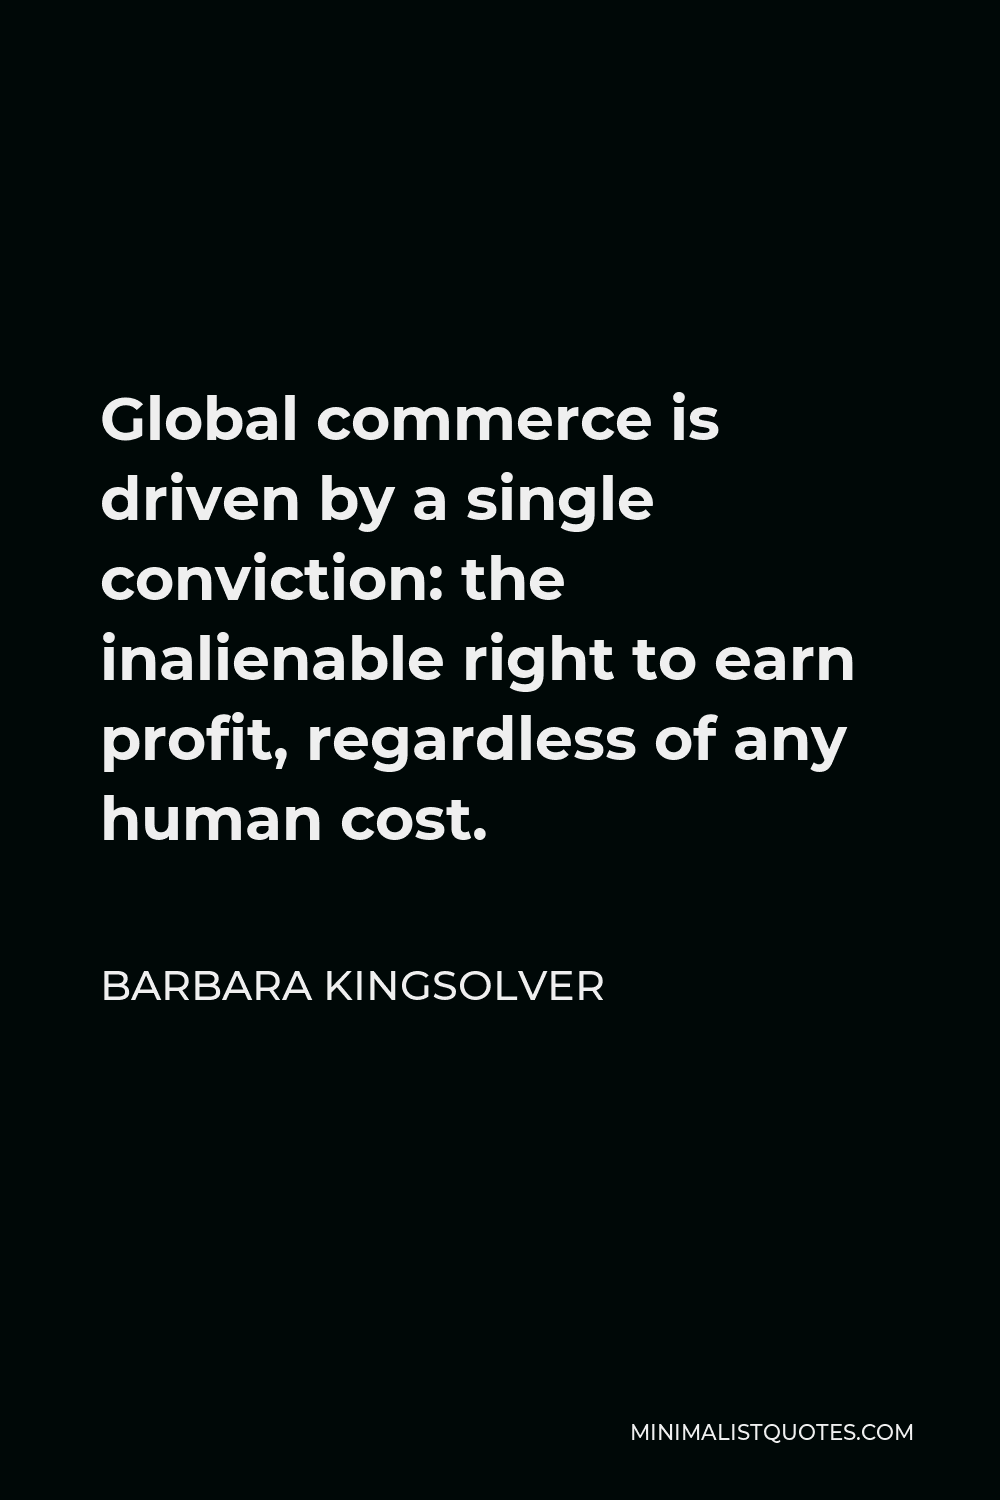 Barbara Kingsolver Quote - Global commerce is driven by a single conviction: the inalienable right to earn profit, regardless of any human cost.